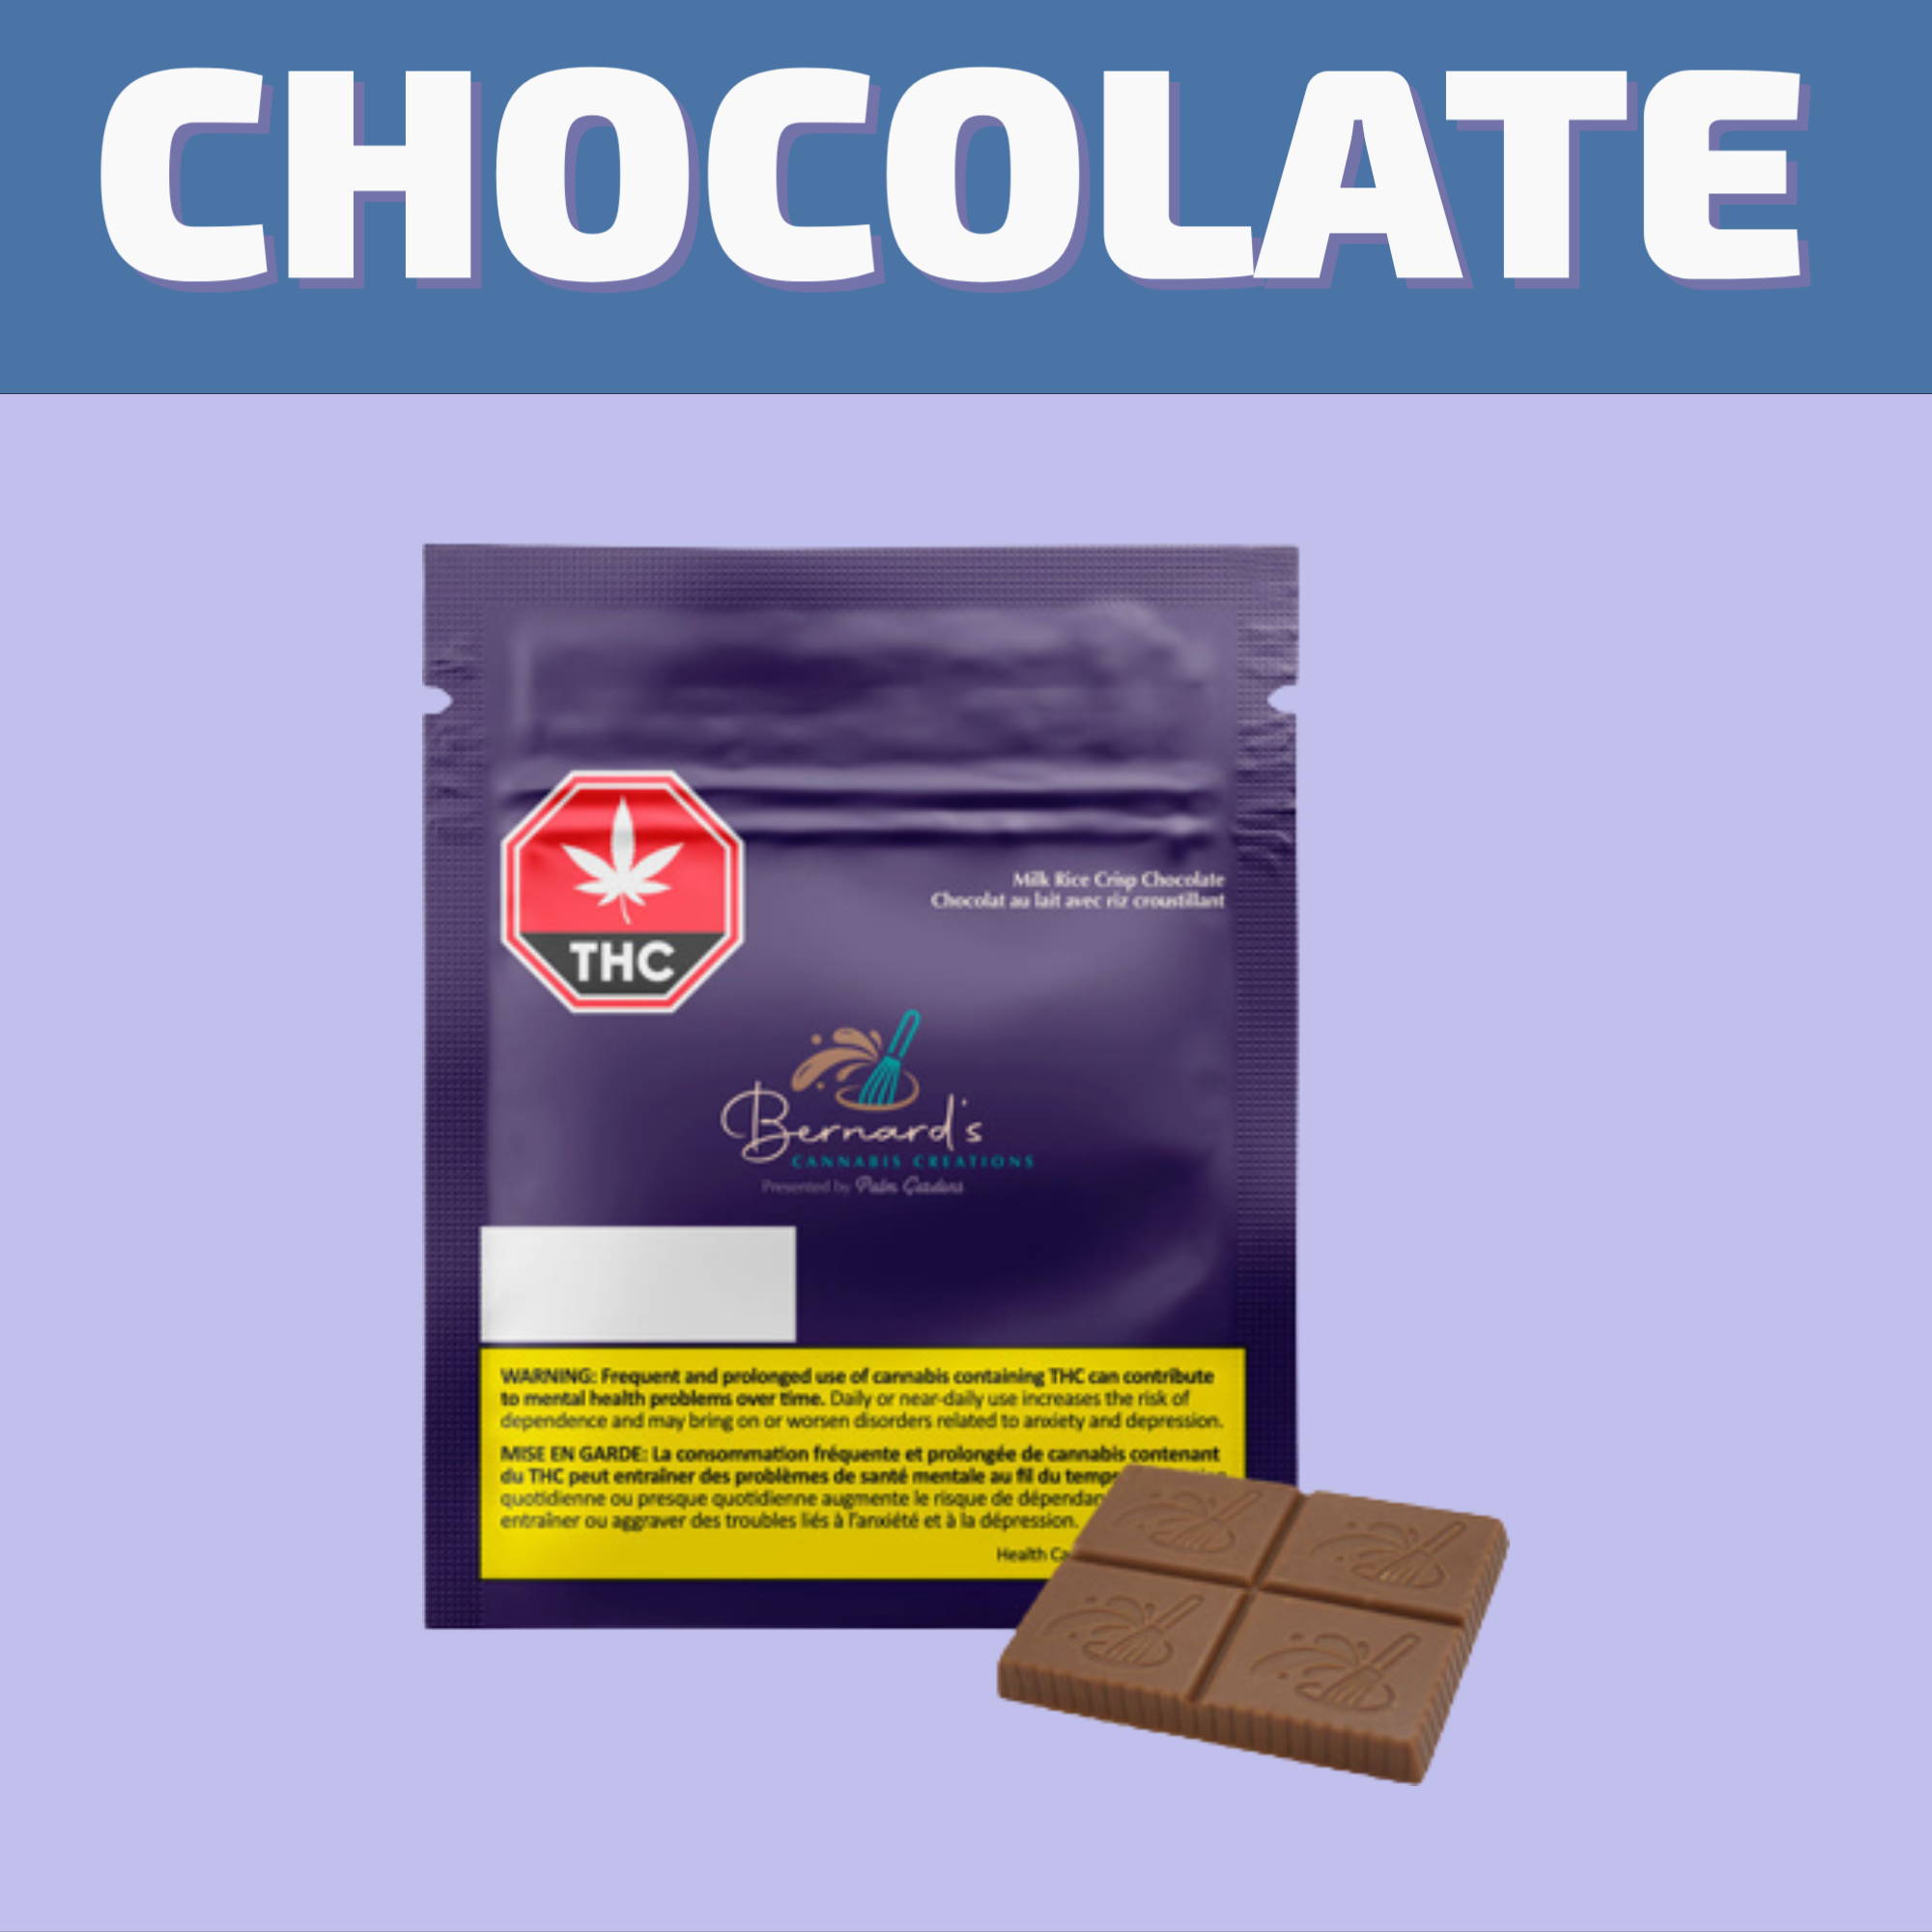 Buy Infused Chocolates, CBD Chocolates and Edibles online for same day delivery in Winnipeg or visit our cannabis store in Winnipeg on 580 Academy Road.